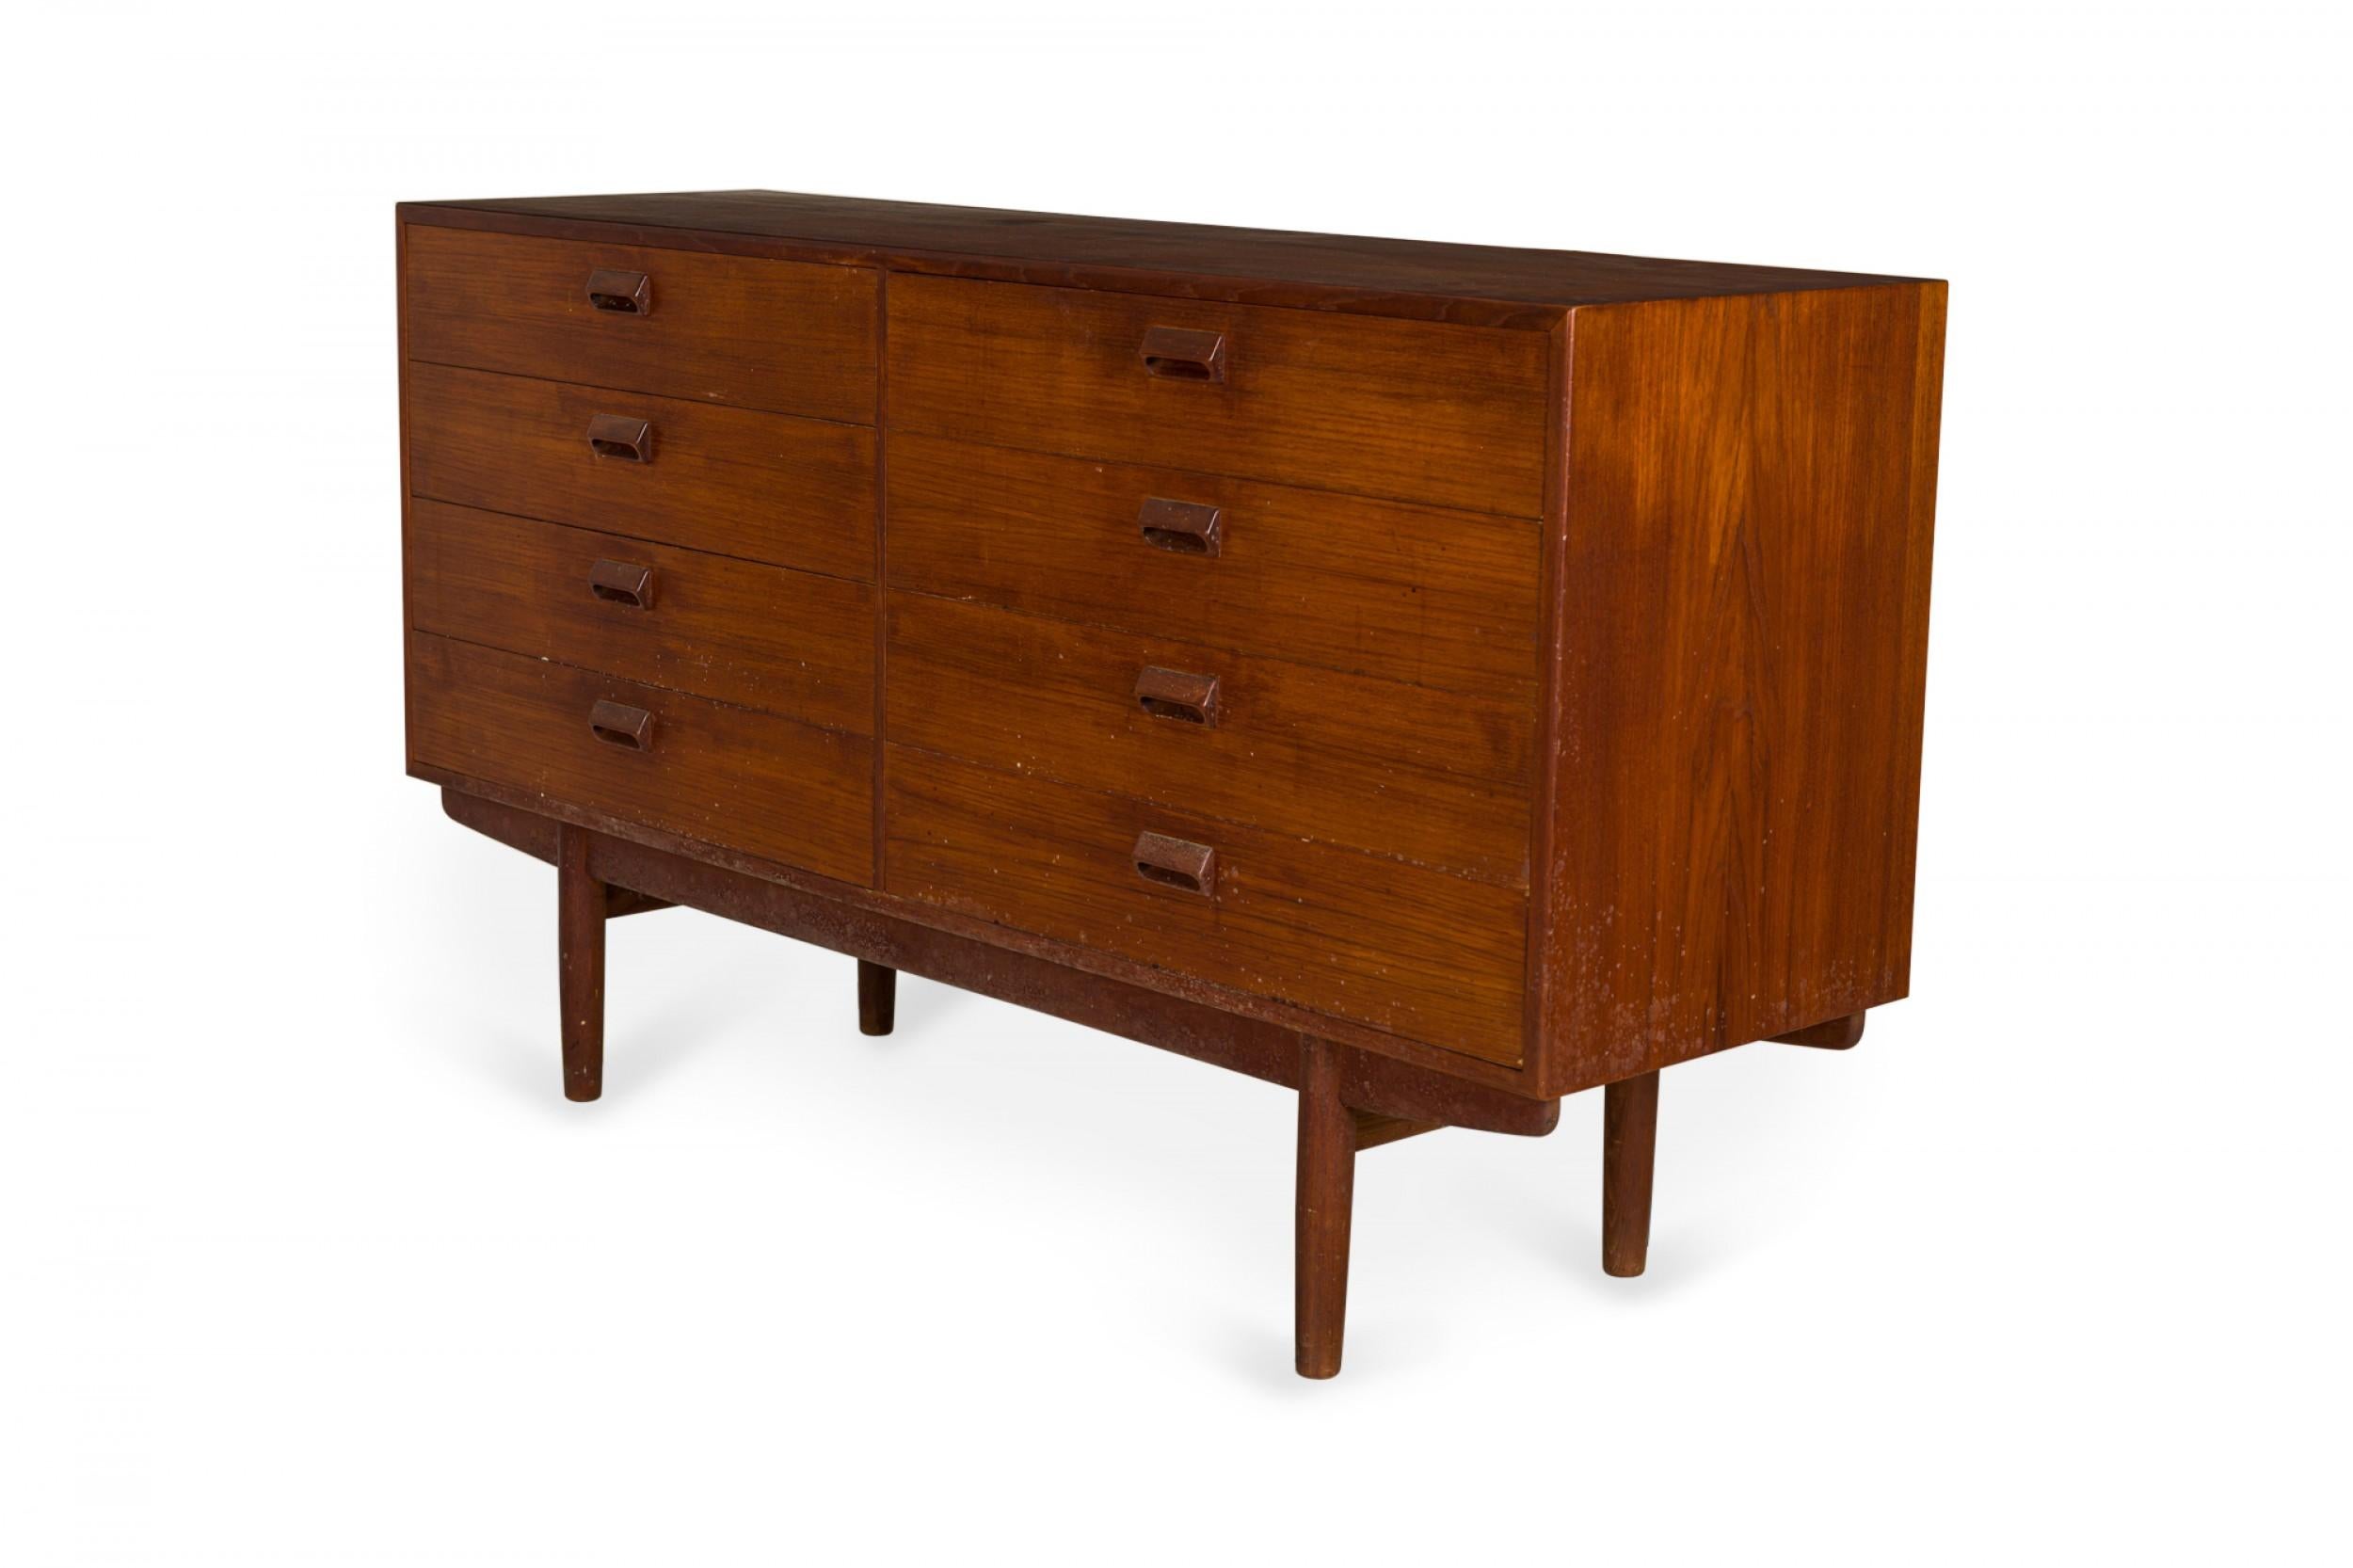 Danish mid-century teak eight-drawer chest with a rectangular cabinets, two sets of four drawers with inset drawer pulls, resting on four tapered teak legs. (BØRGE MOGENSEN)